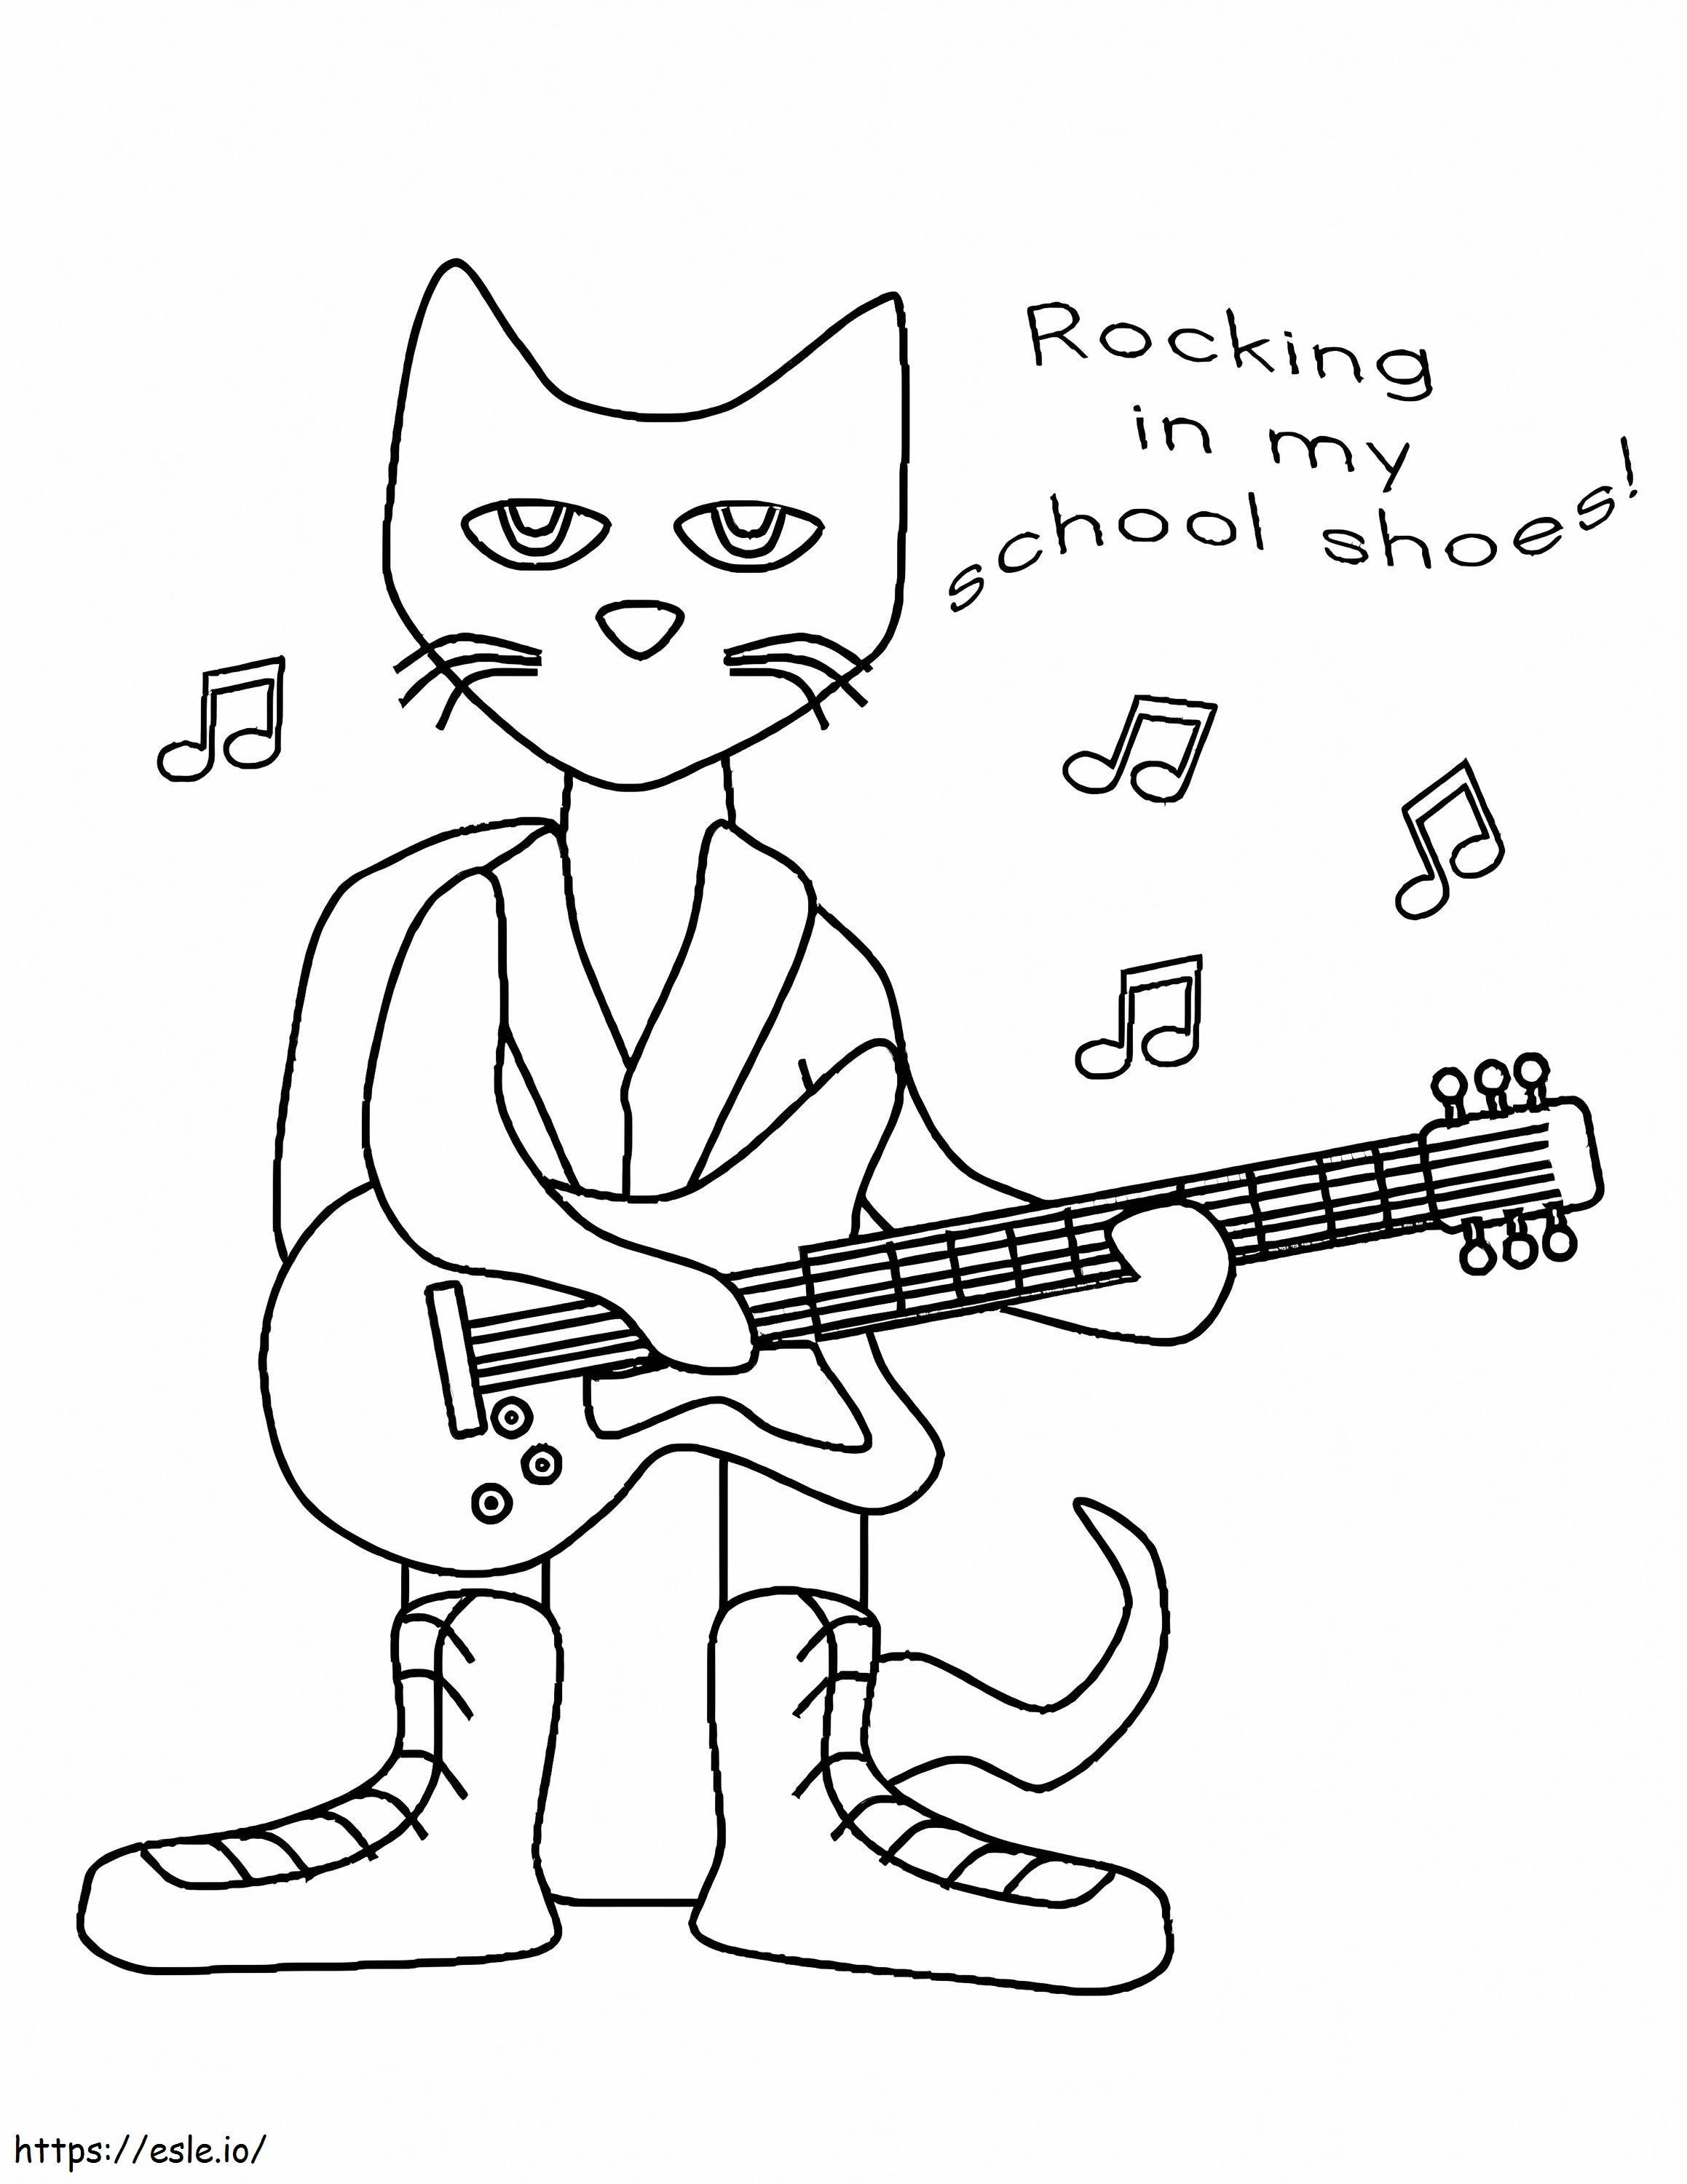 Guitarist Pete The Cat 1 coloring page